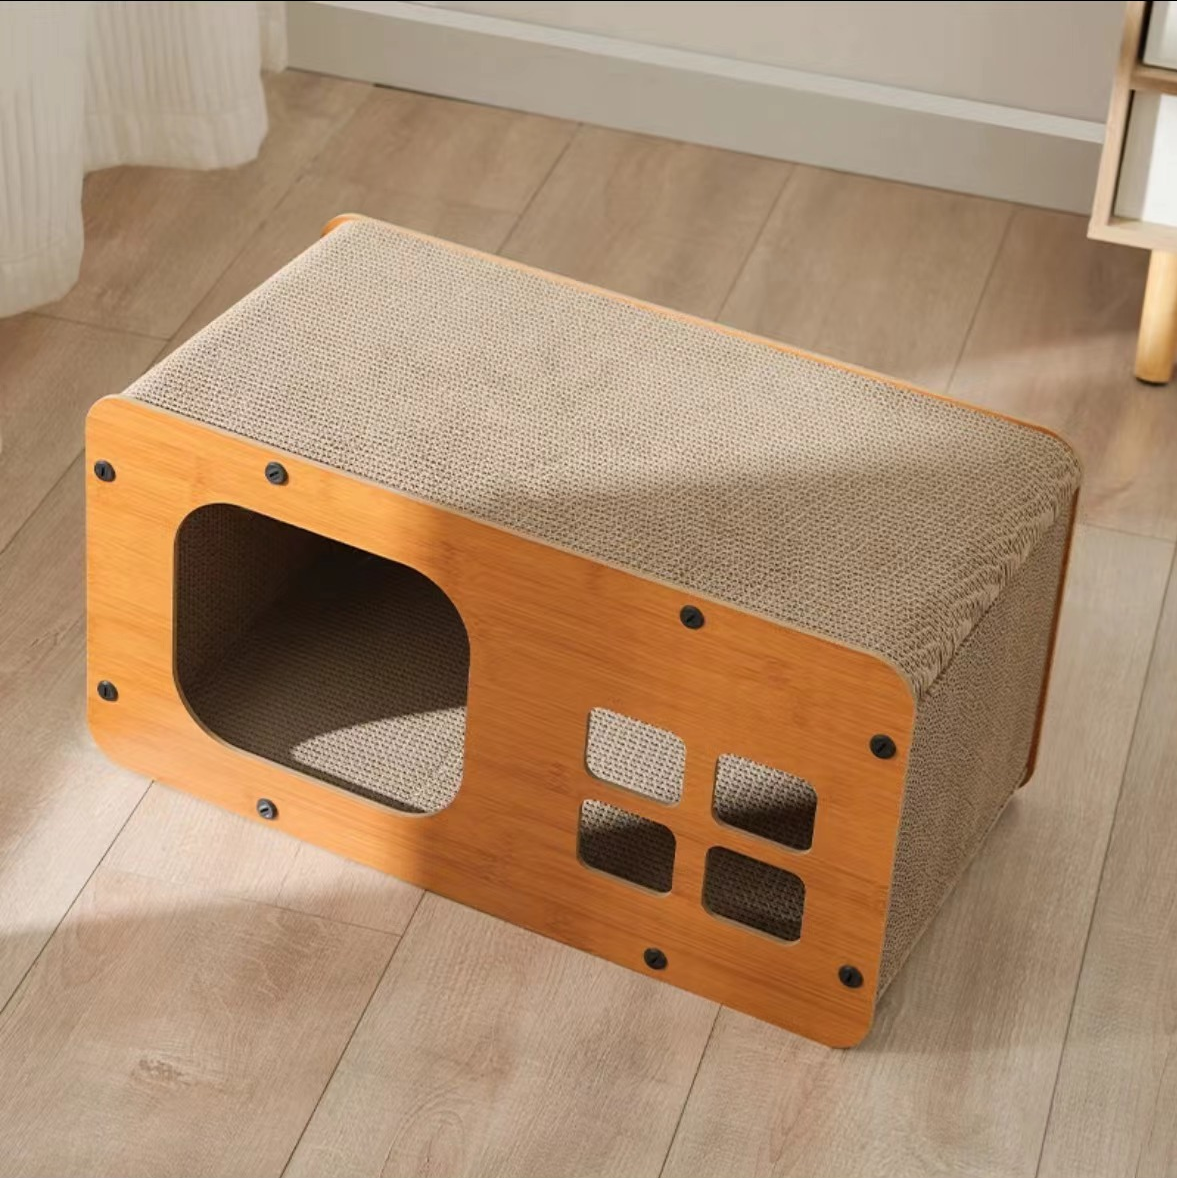 Natural Wood Color Cat House